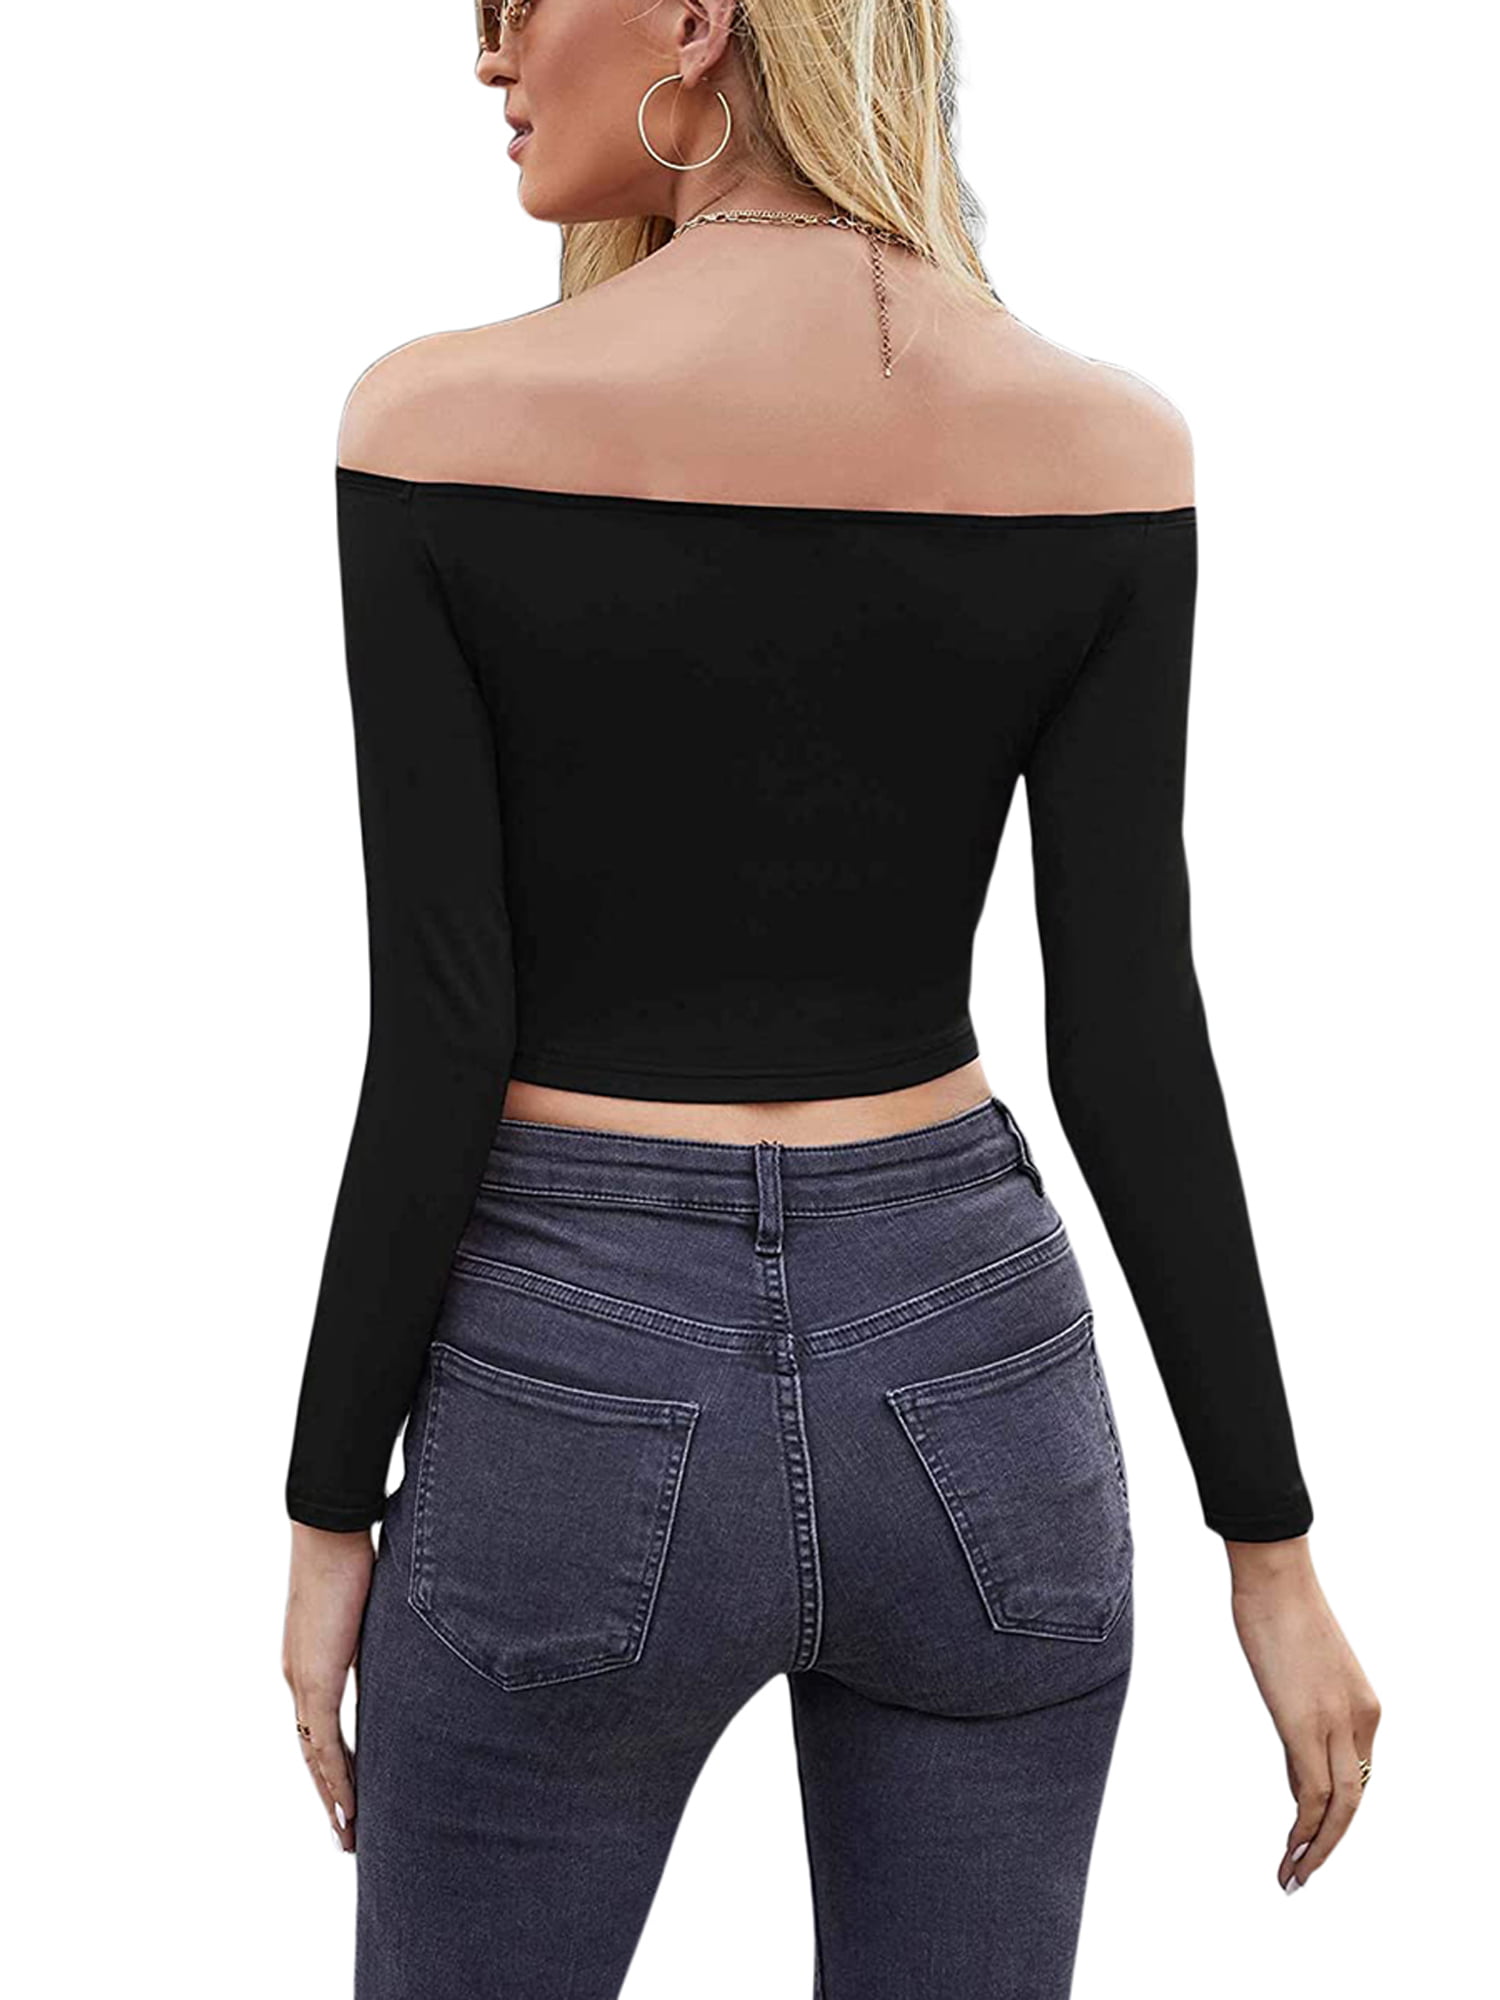 Cioatin Women Sexy Off Shoulder Long Sleeve Crop Tops Tight Form